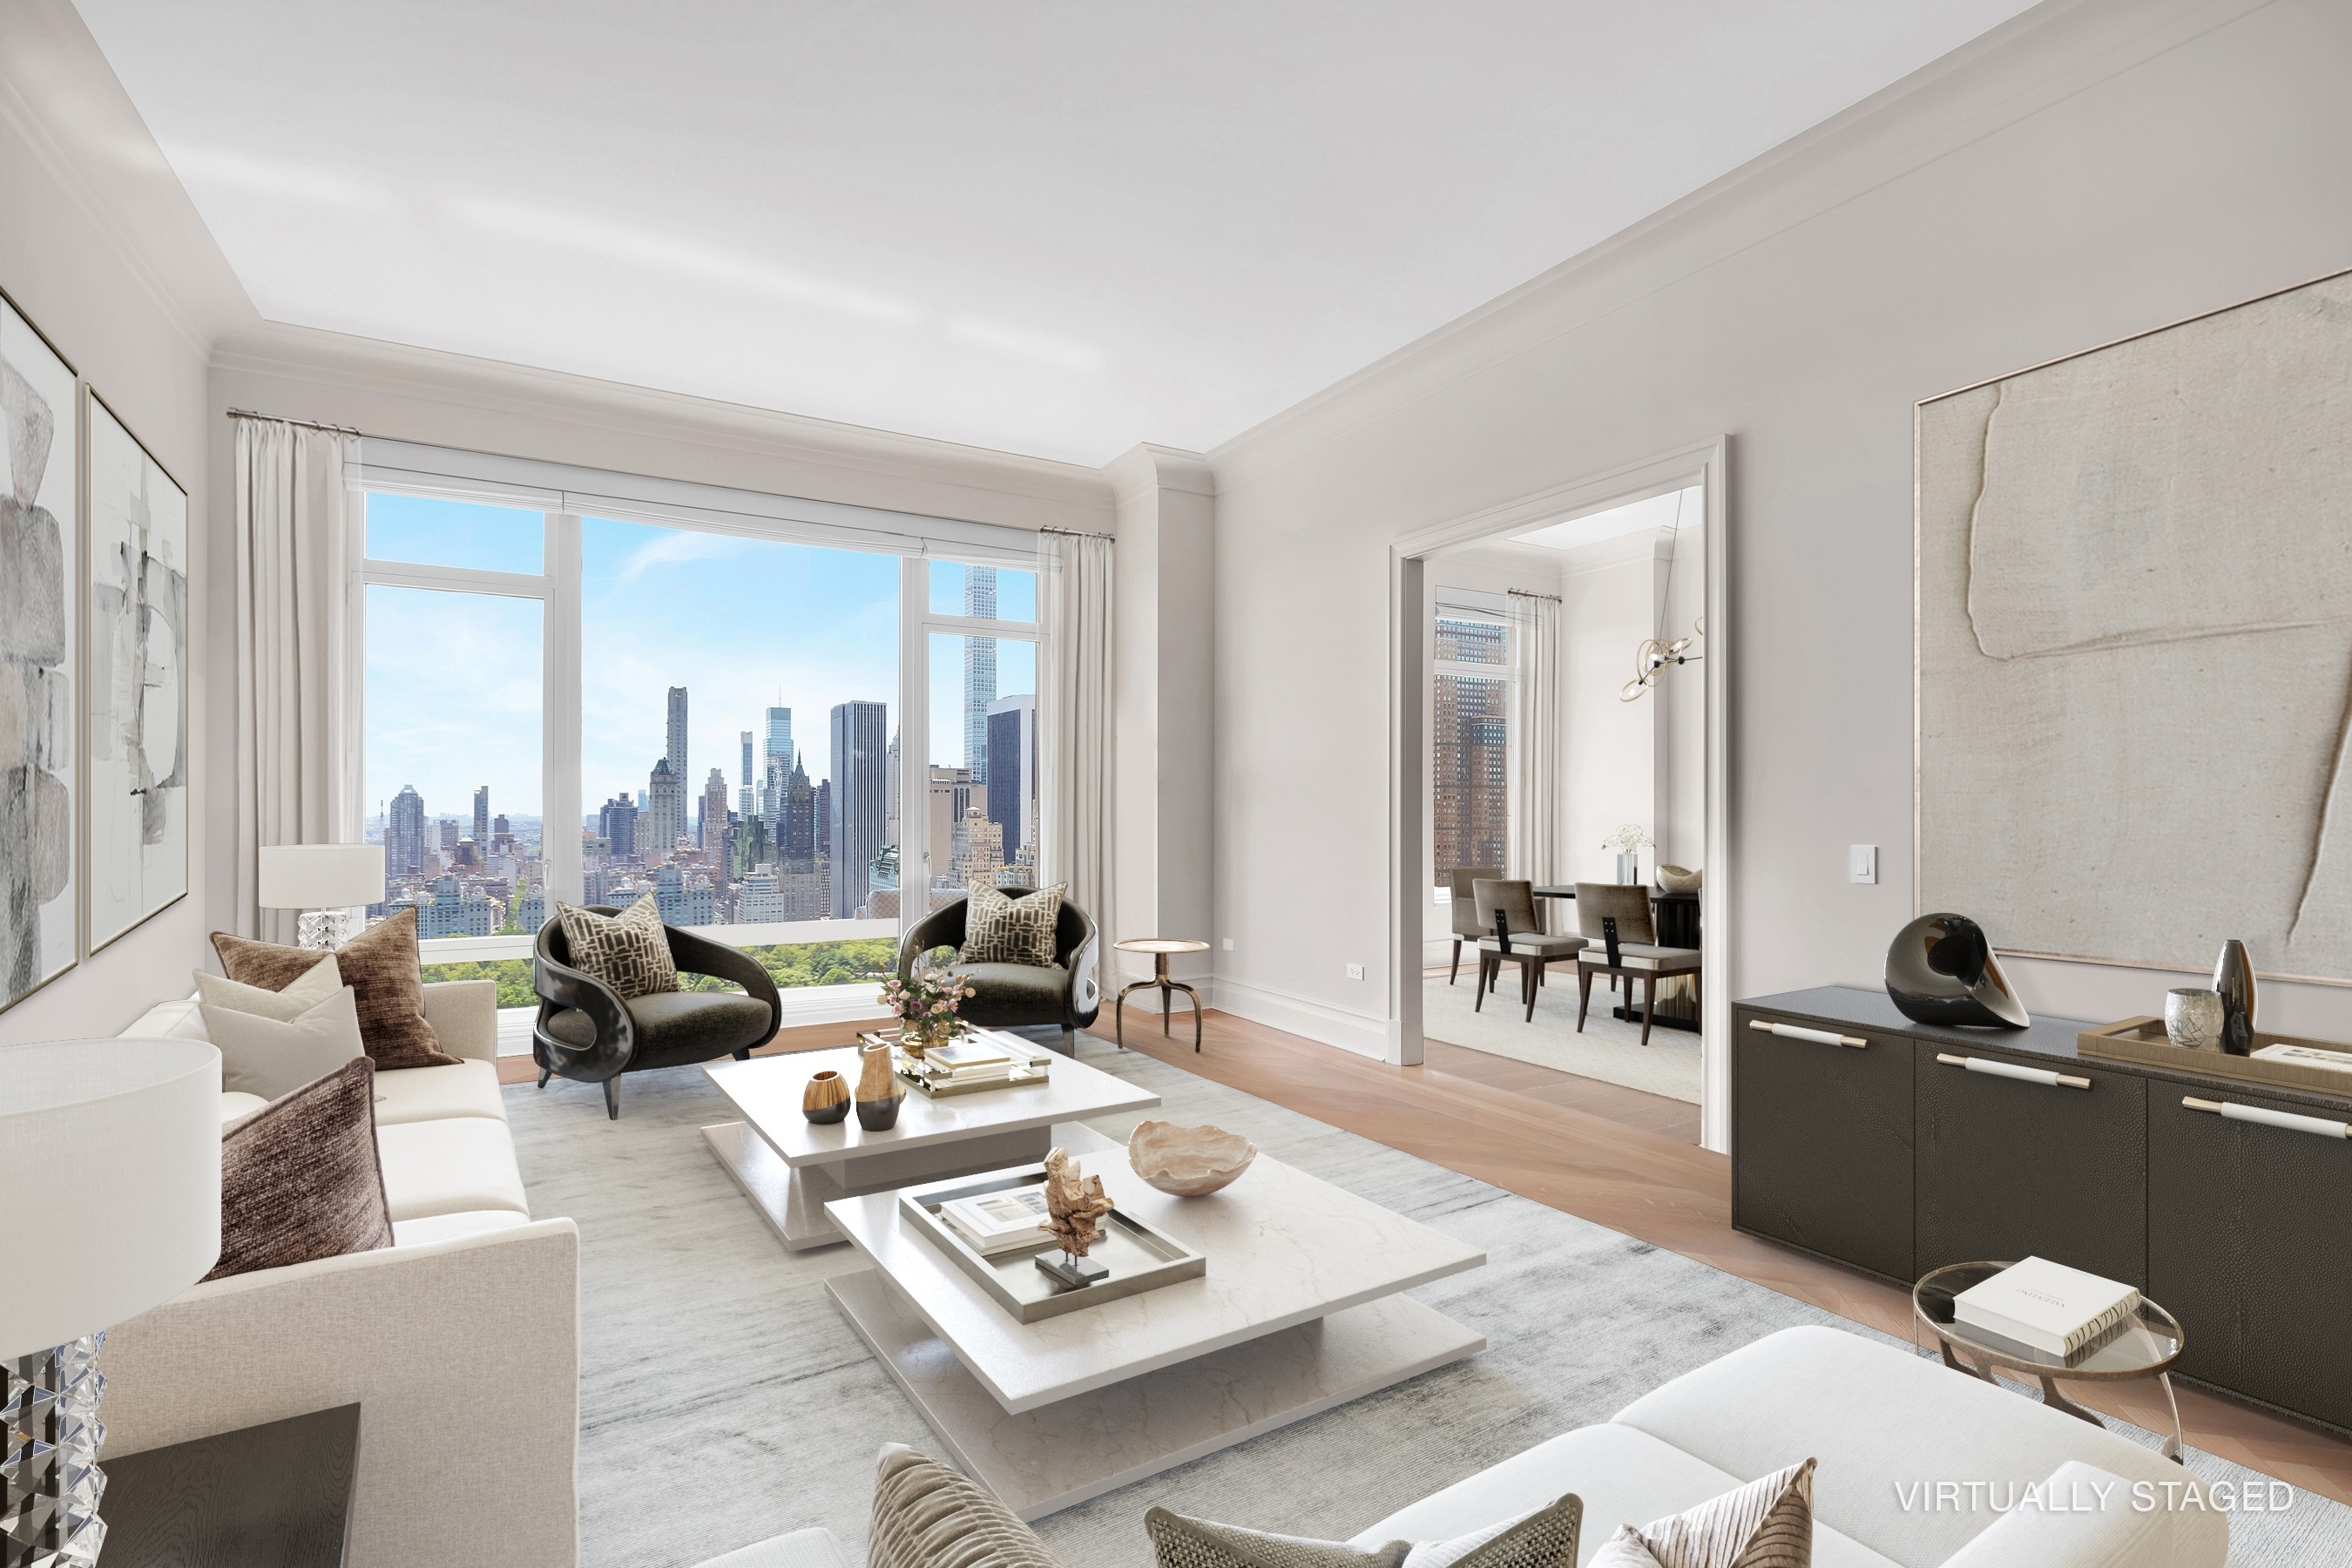 Property at 15 Cpw, 15 CENTRAL PARK W, 33C Lincoln Square, New York, New York 10023